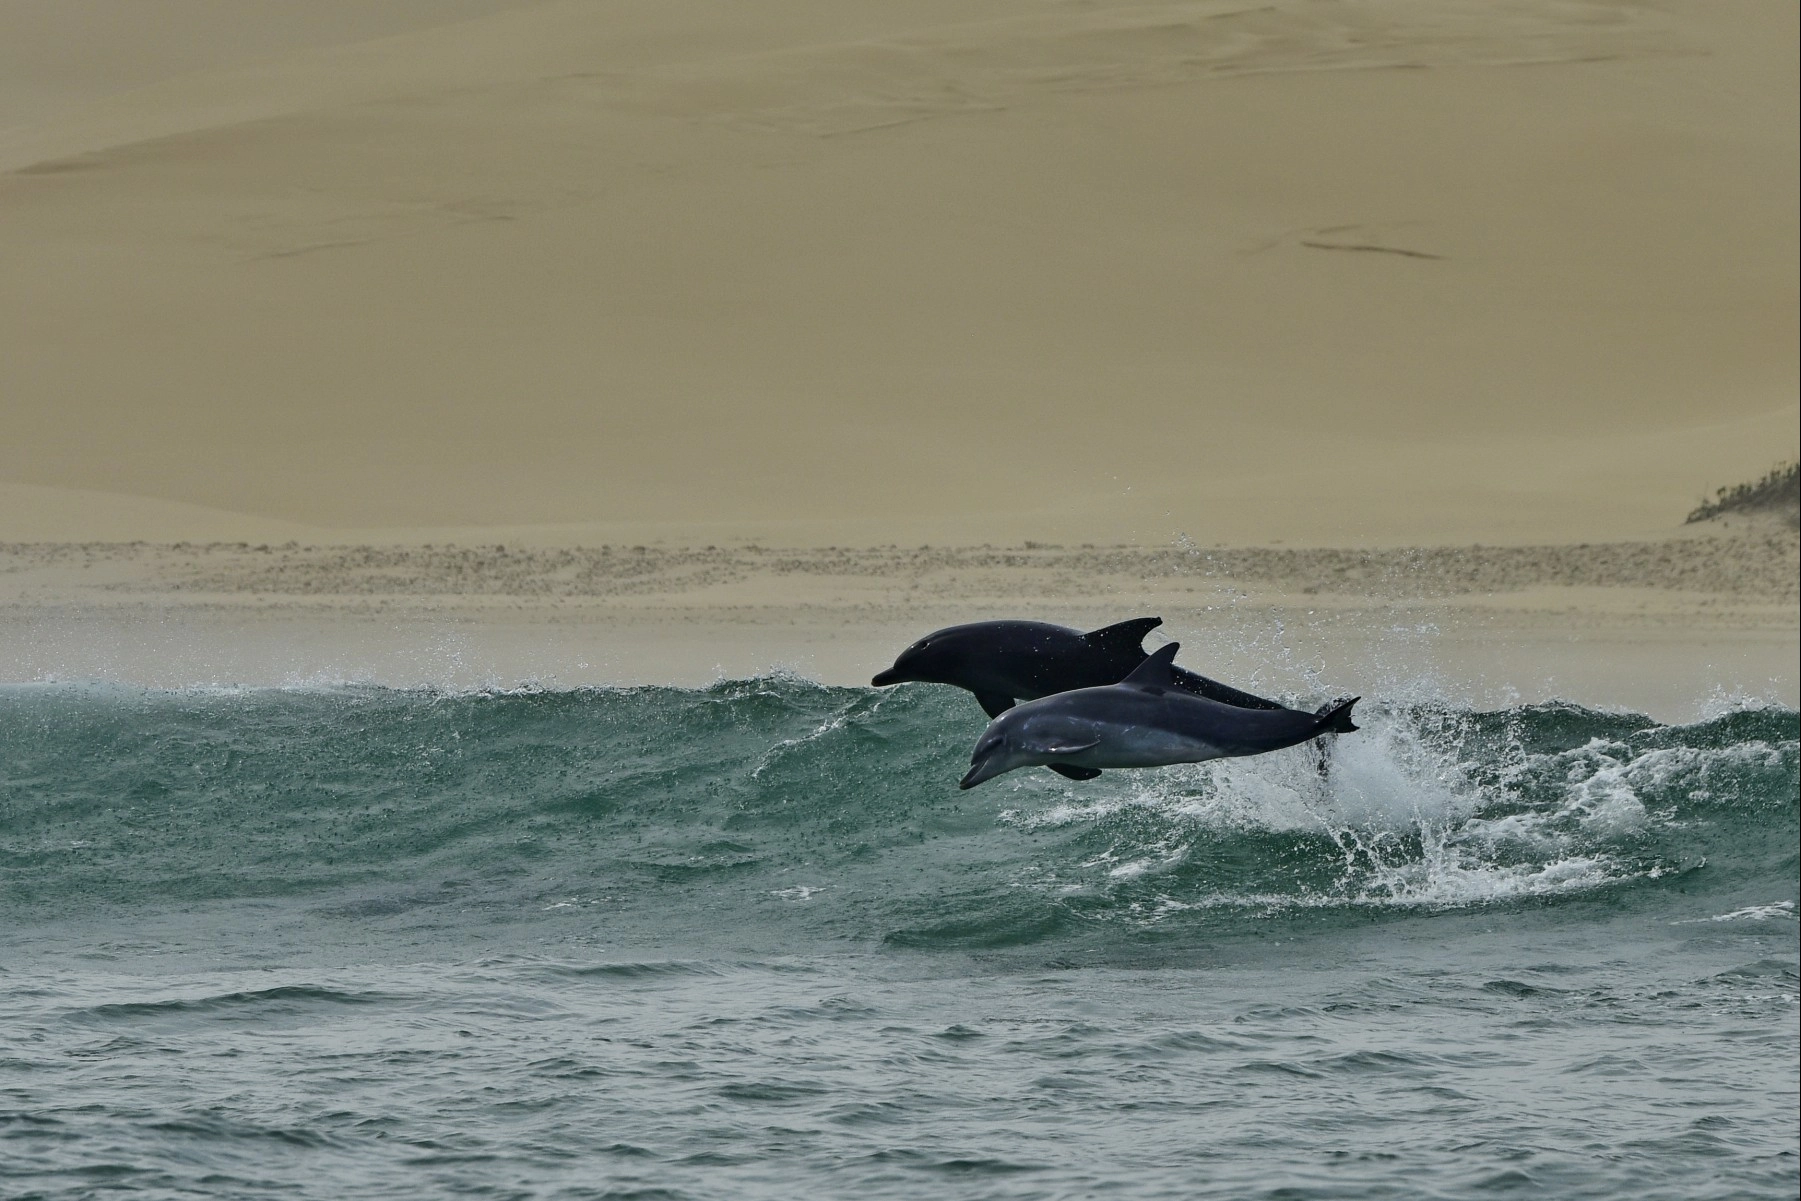 Two wild dolphins jumping out of the water